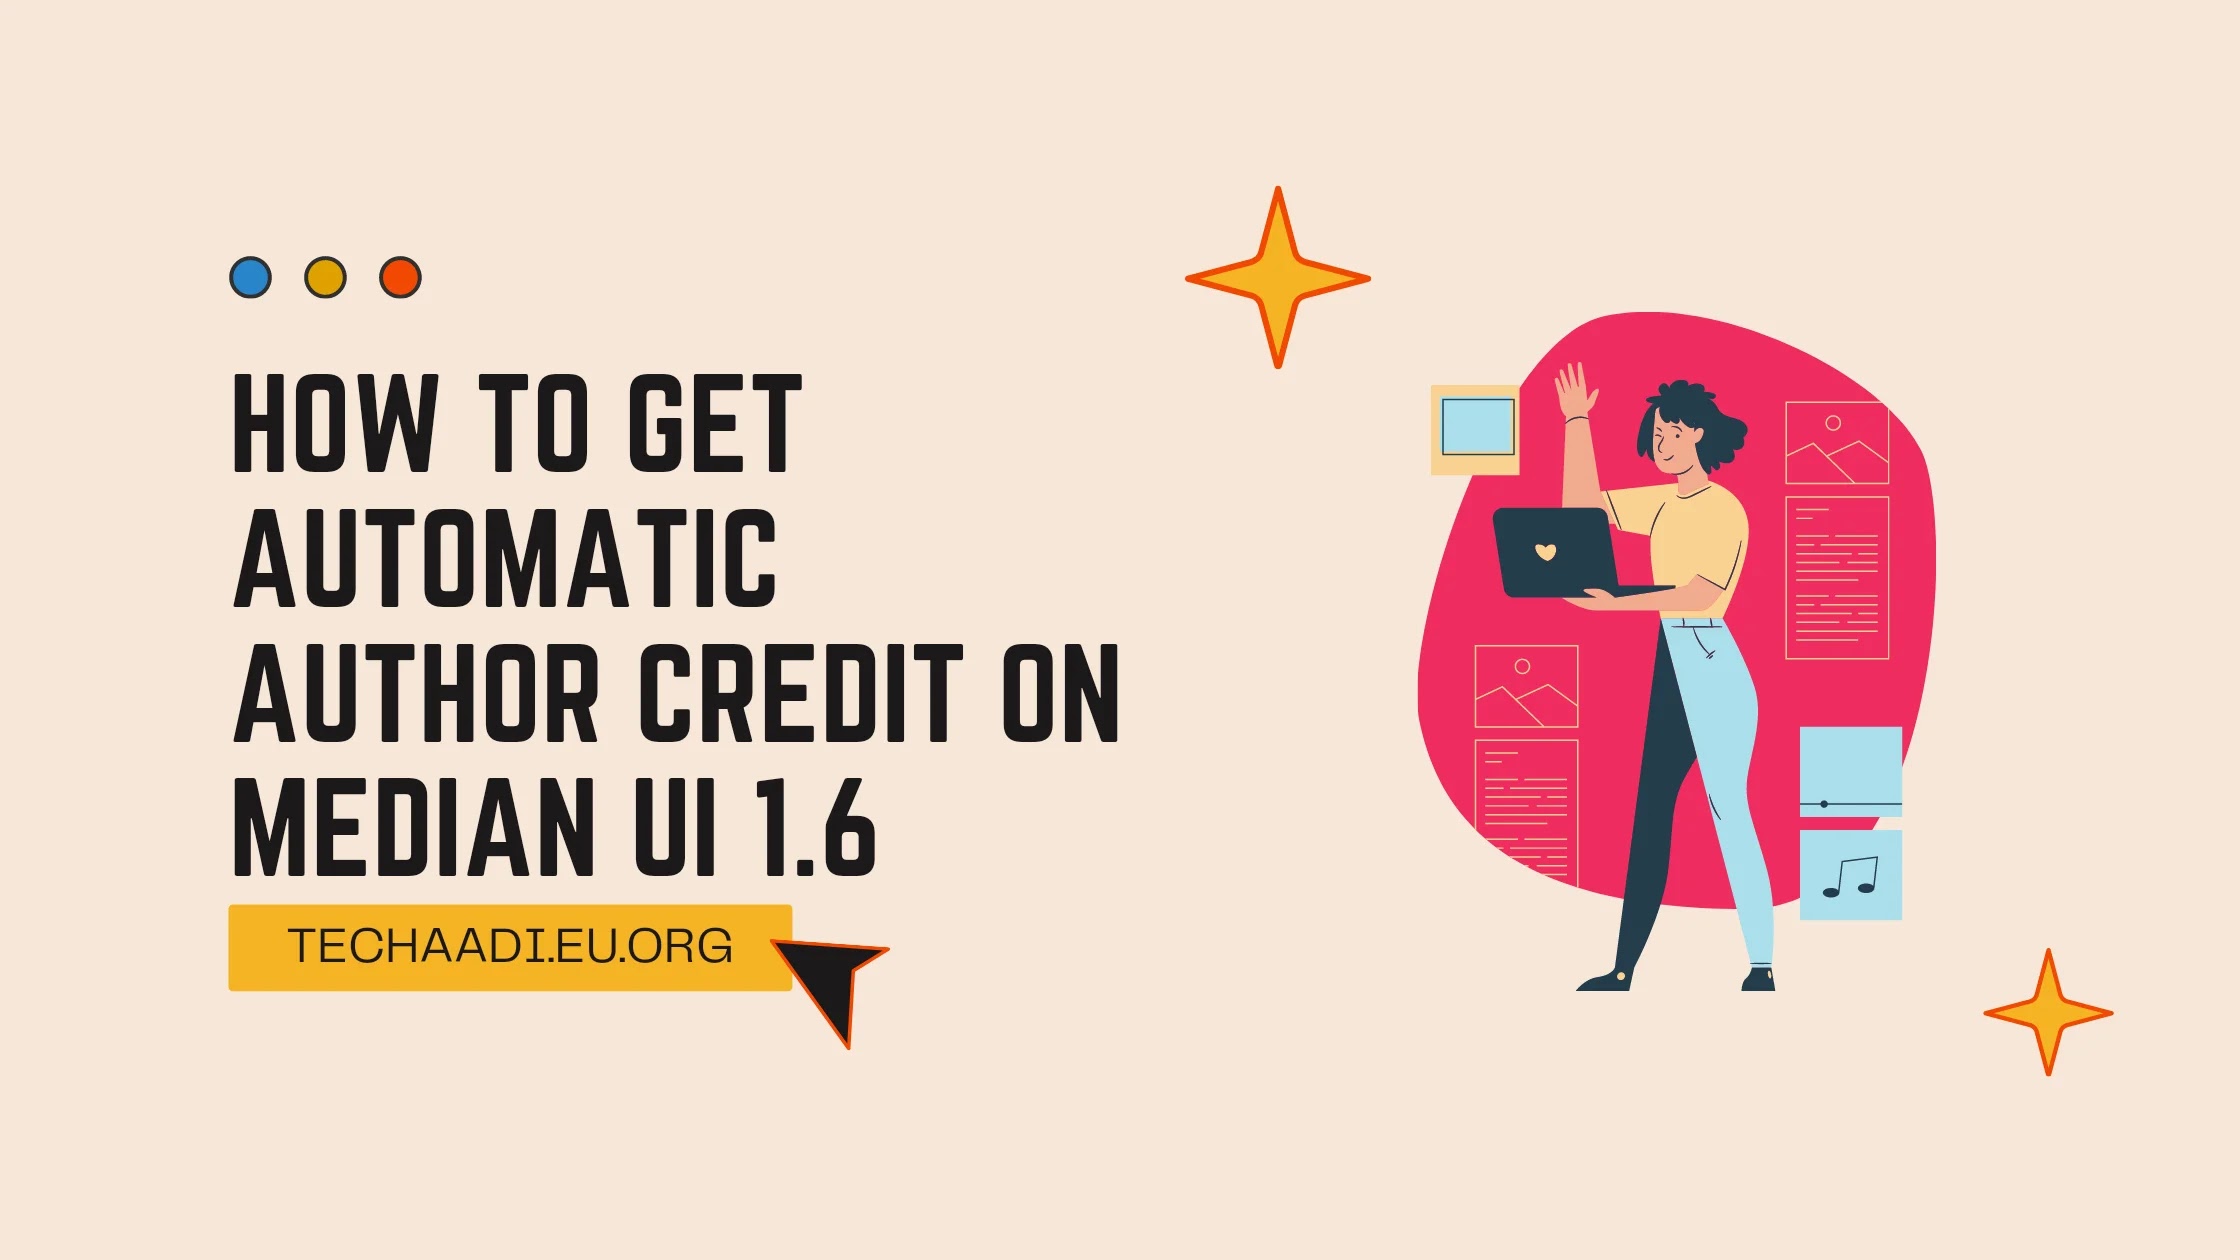 How to Get Automatic Author Credit on Median Ui 1.6